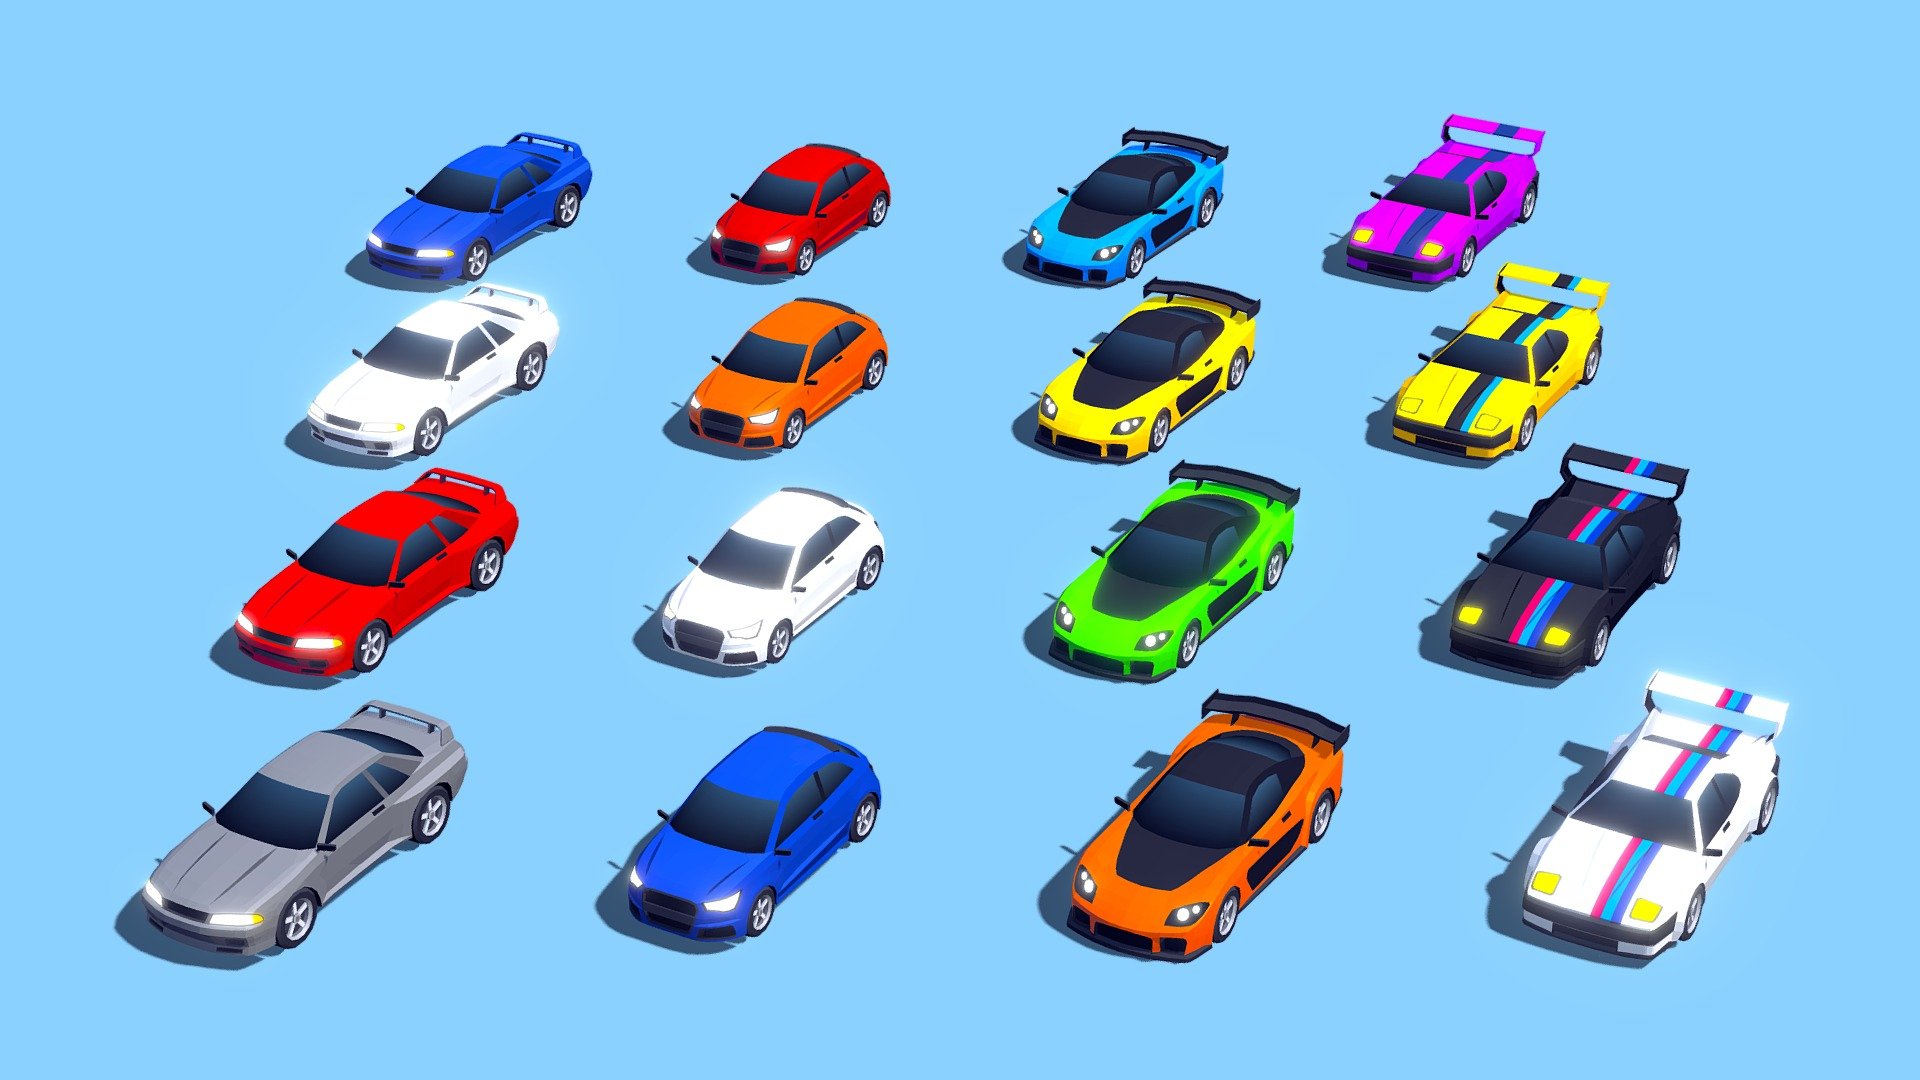 November update (2022.11) of the Low Poly Cars - Mega Pack asset, which is available in the Unity Asset Store.

It includes 4 new cars: Mazda RX7 Veilside, Nissan Skyline R32, Audi A1 and BMW M1 Procar 3d model